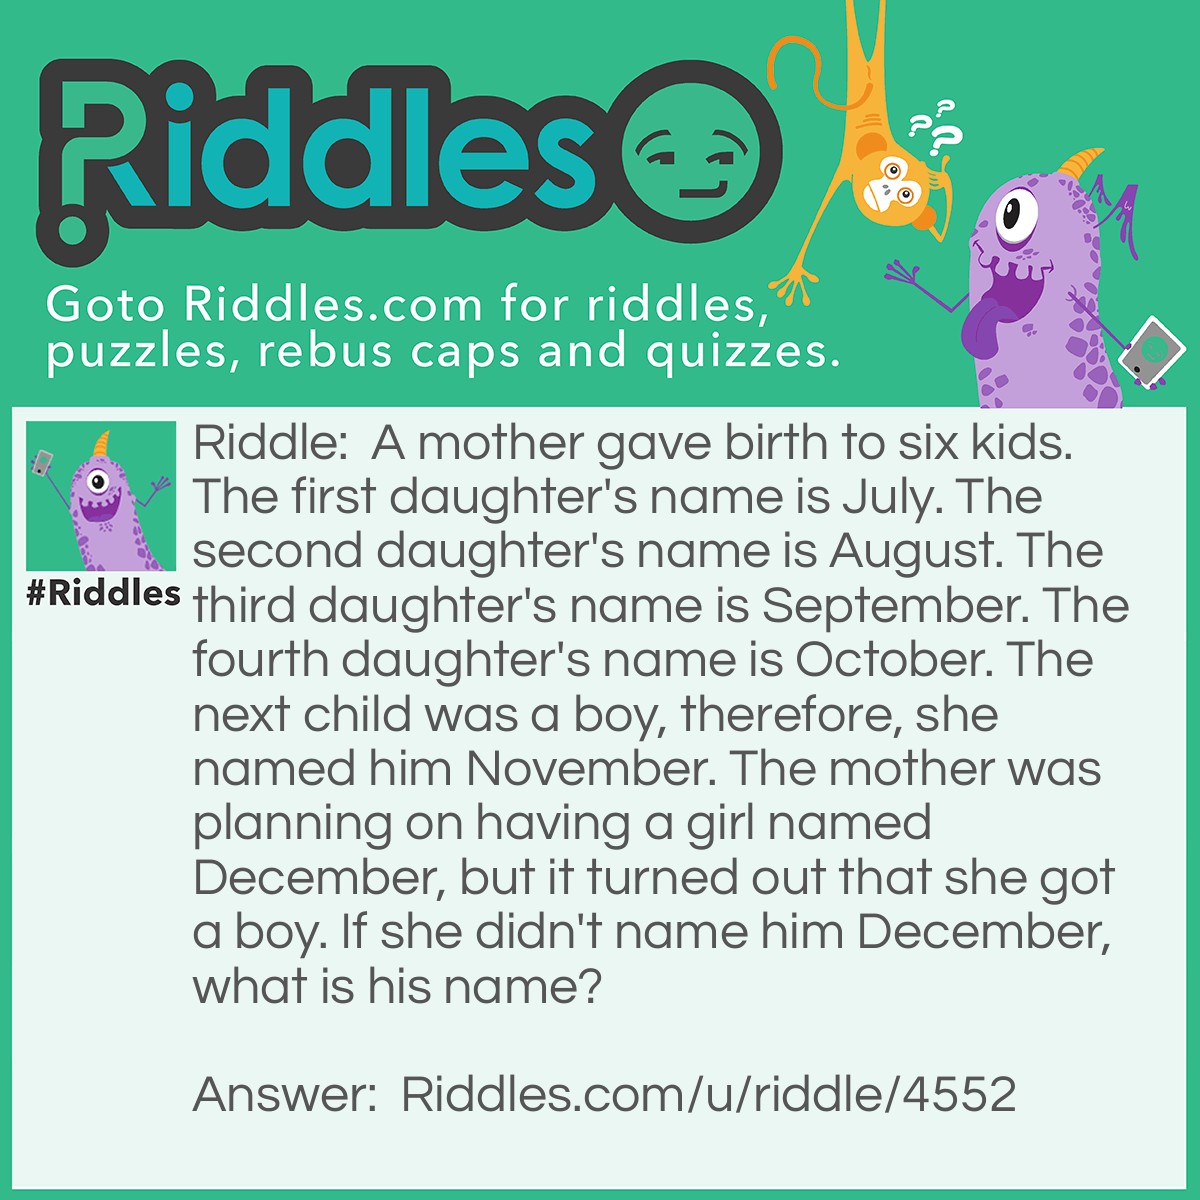 Riddle: A mother gave birth to six kids. The first daughter's name is July. The second daughter's name is August. The third daughter's name is September. The fourth daughter's name is October. The next child was a boy, therefore, she named him November. The mother was planning on having a girl named December, but it turned out that she got a boy. If she didn't name him December, what is his name? Answer: Jason,because [J]uly [A]ugust [S]eptember [O]ctober [N]ovember [JASON].